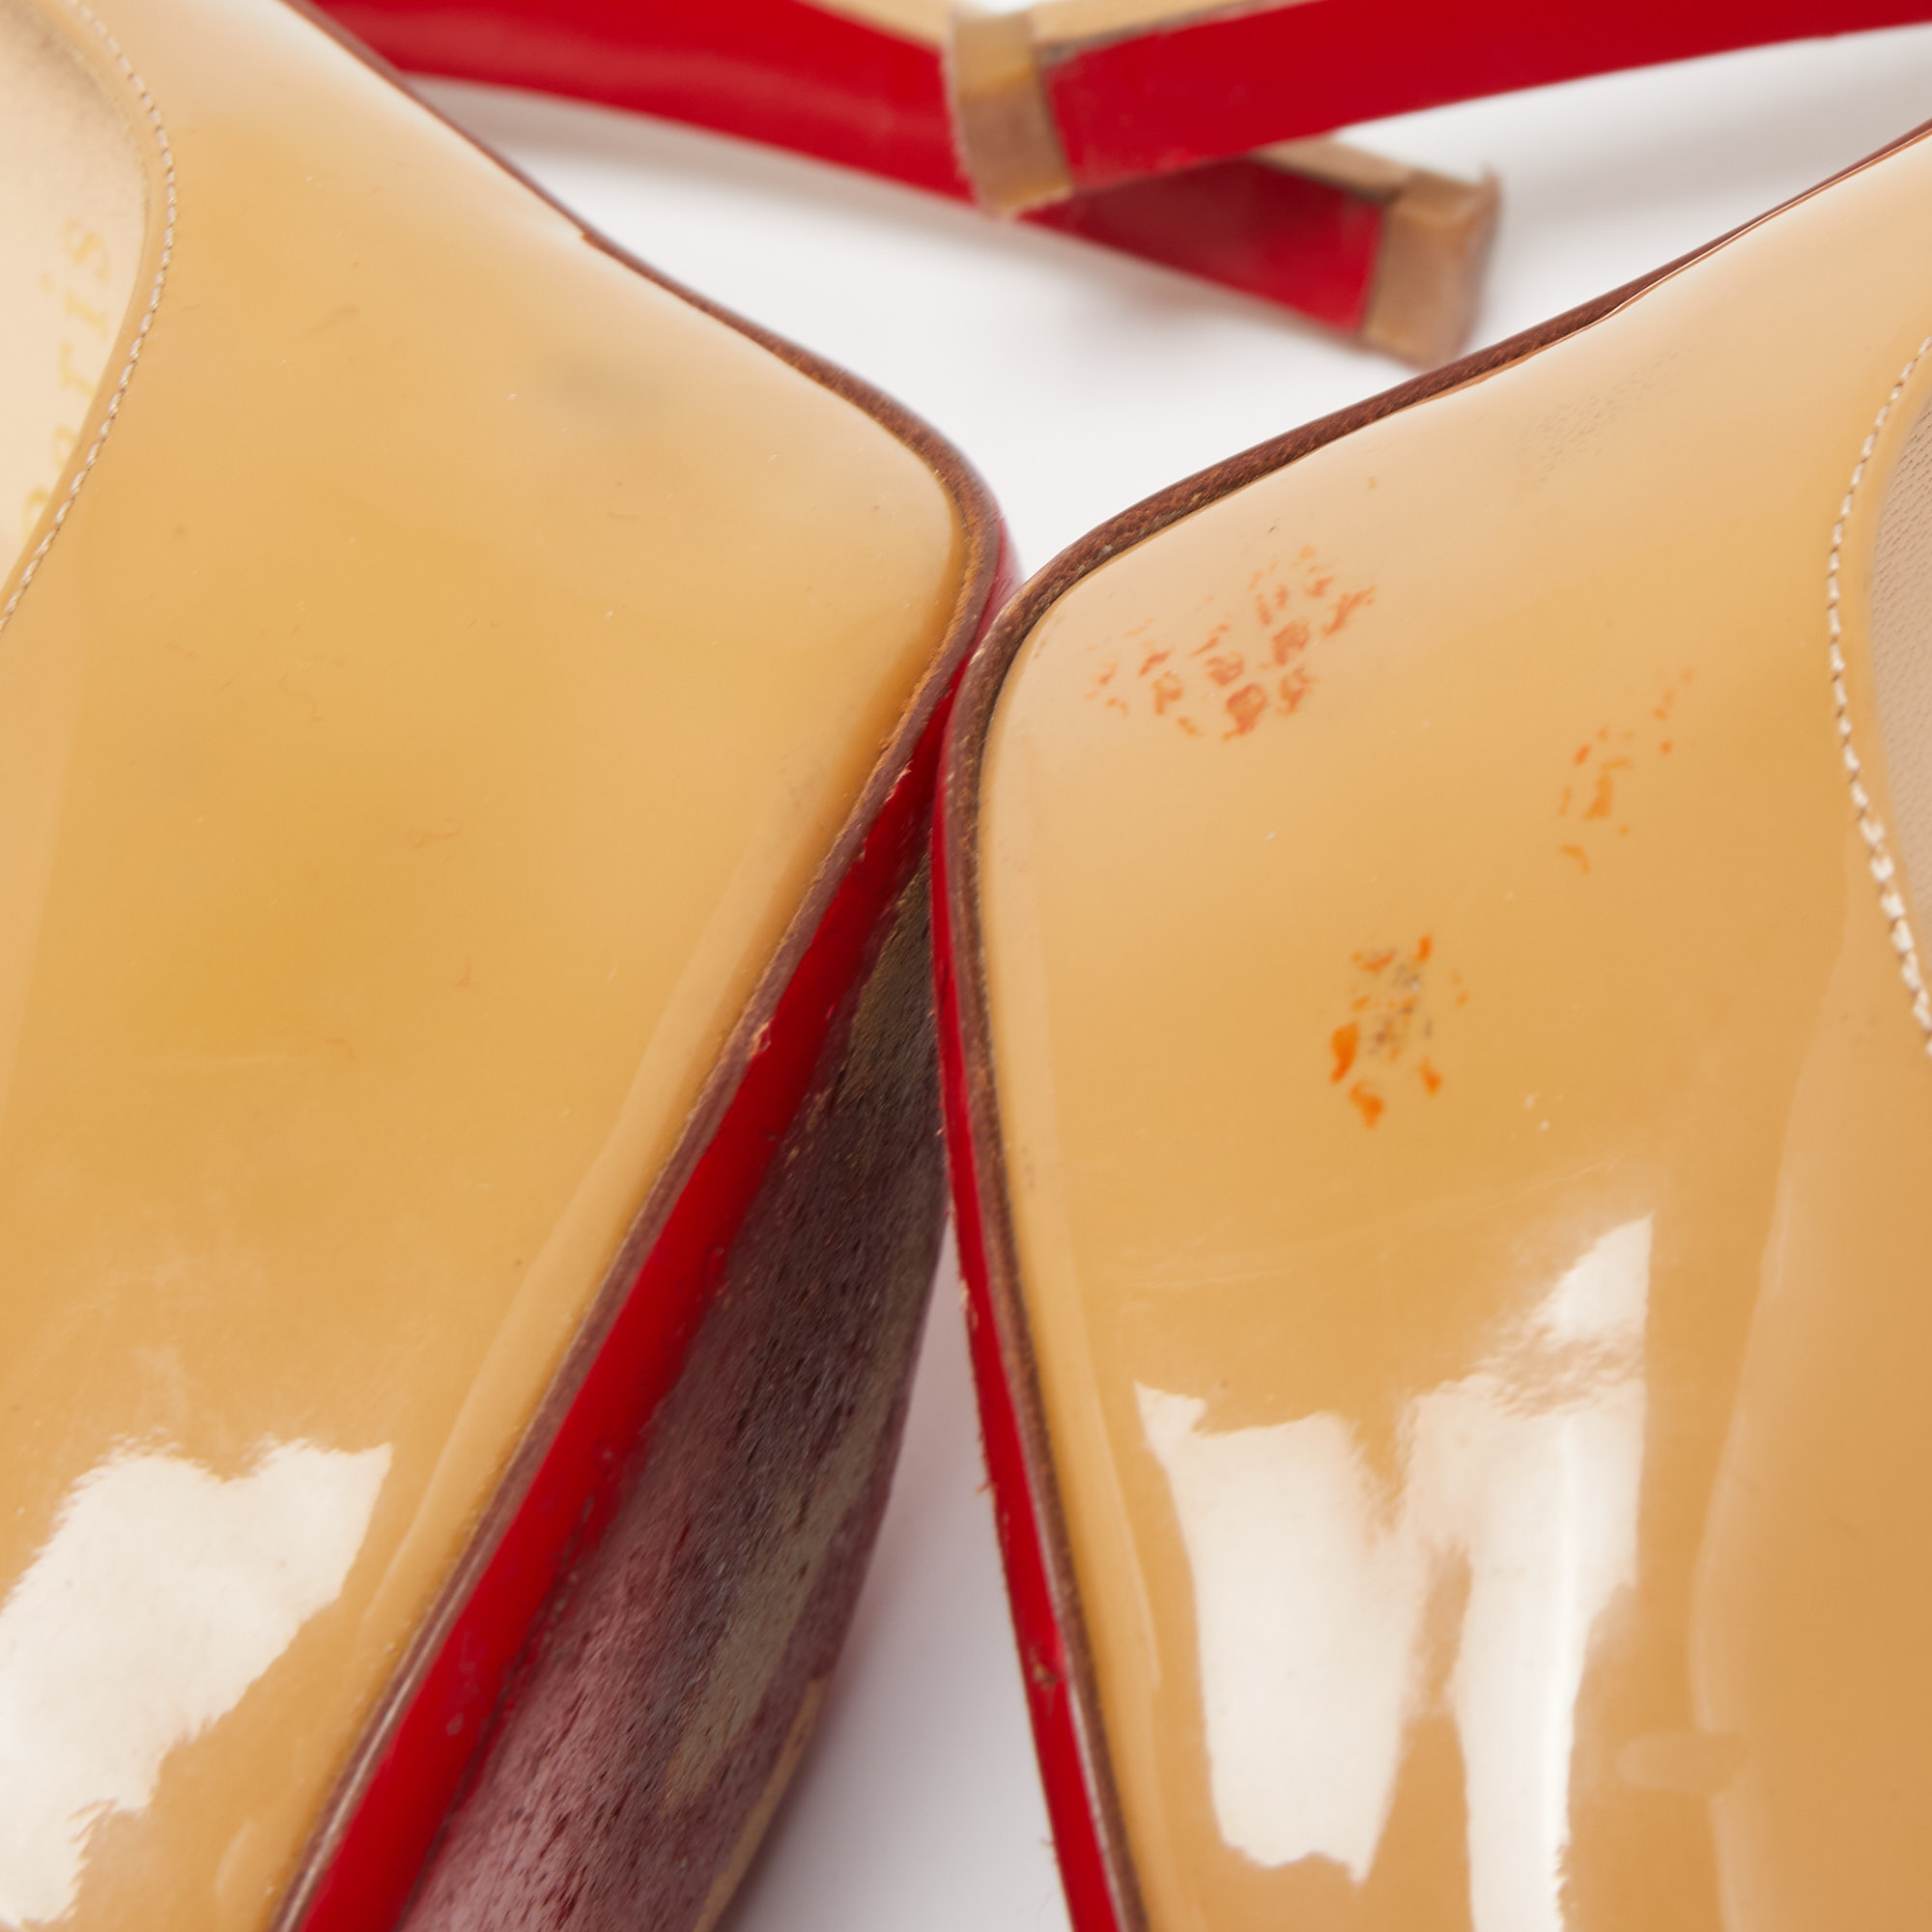 Christian Louboutin Beige Patent Leather Very Prive Pumps Size 35